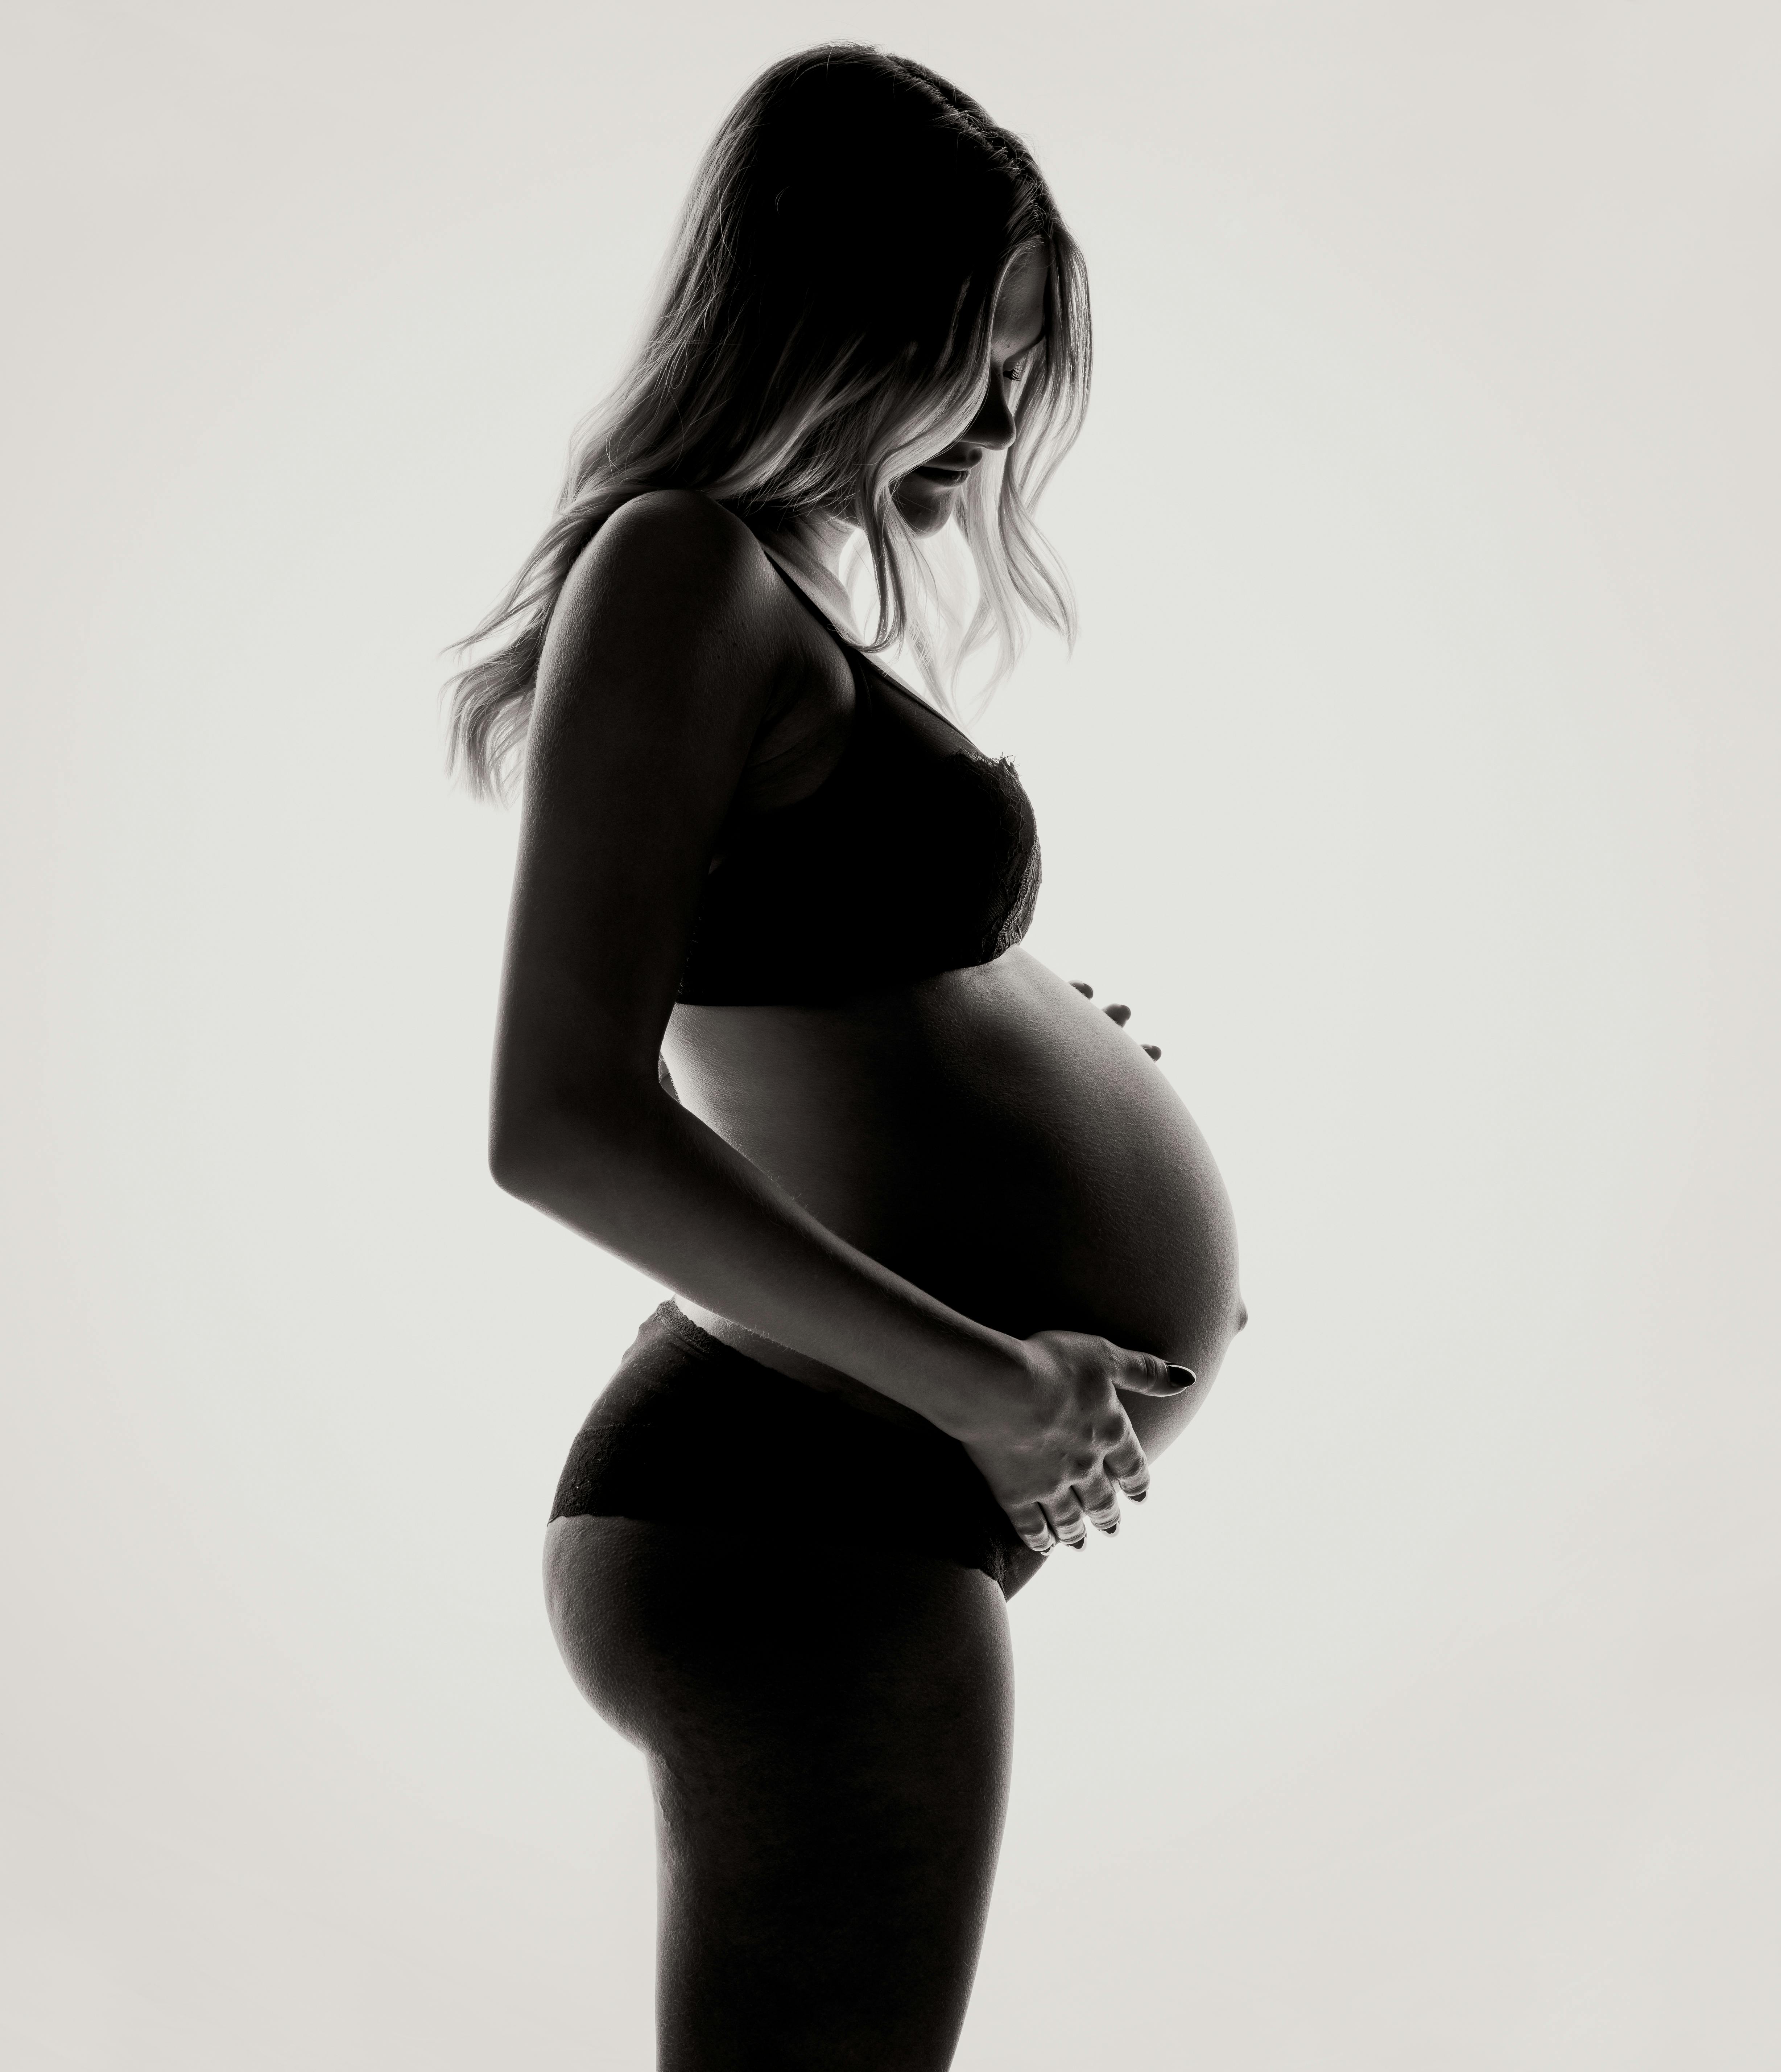 63 Body Pregnancy Simulator Royalty-Free Images, Stock Photos